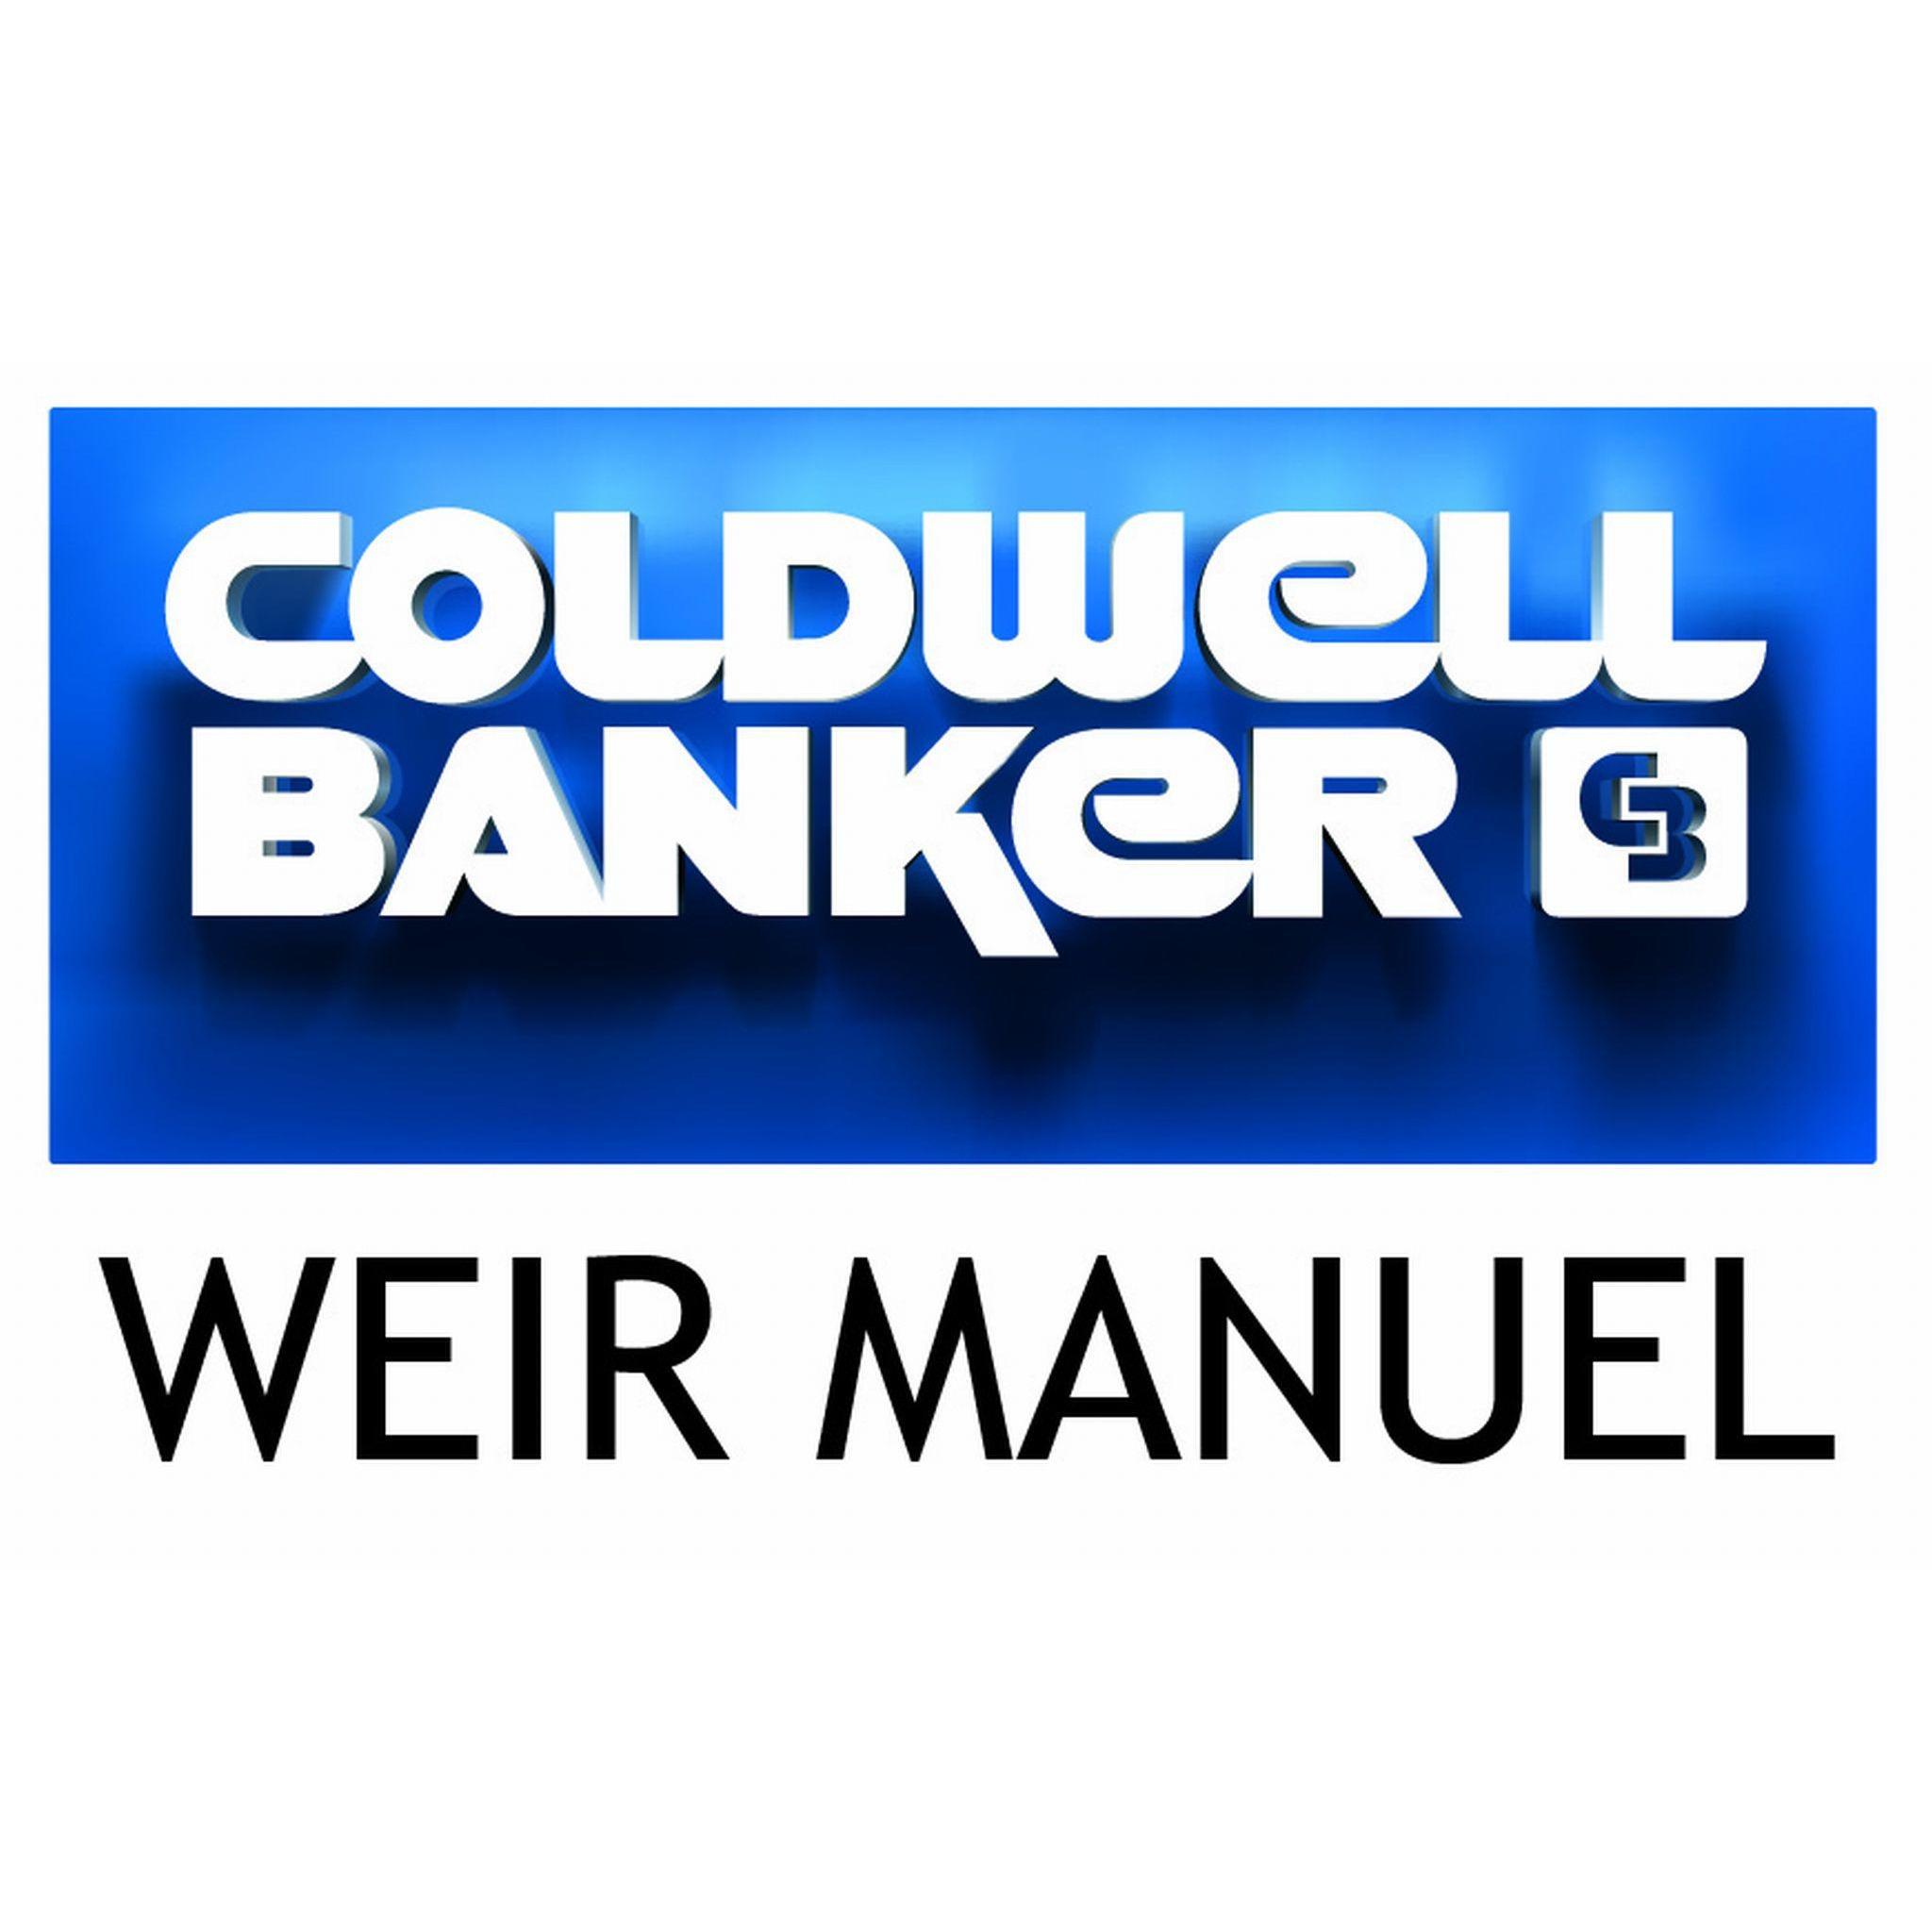 Holly Drouin | Coldwell Banker Weir Manuel Logo